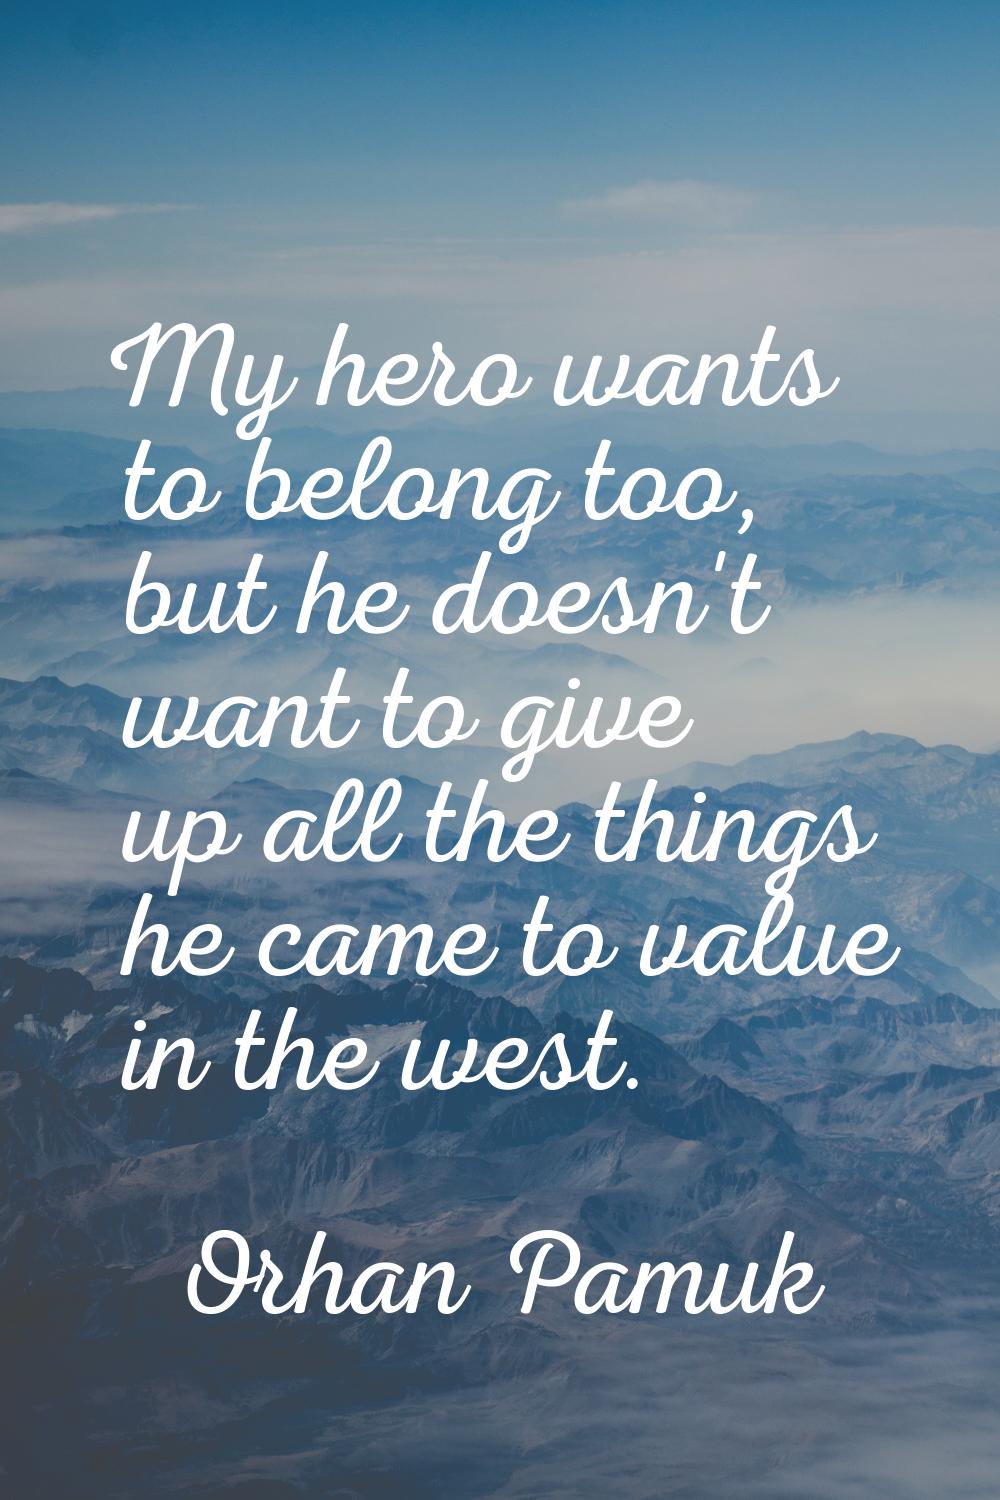 My hero wants to belong too, but he doesn't want to give up all the things he came to value in the 